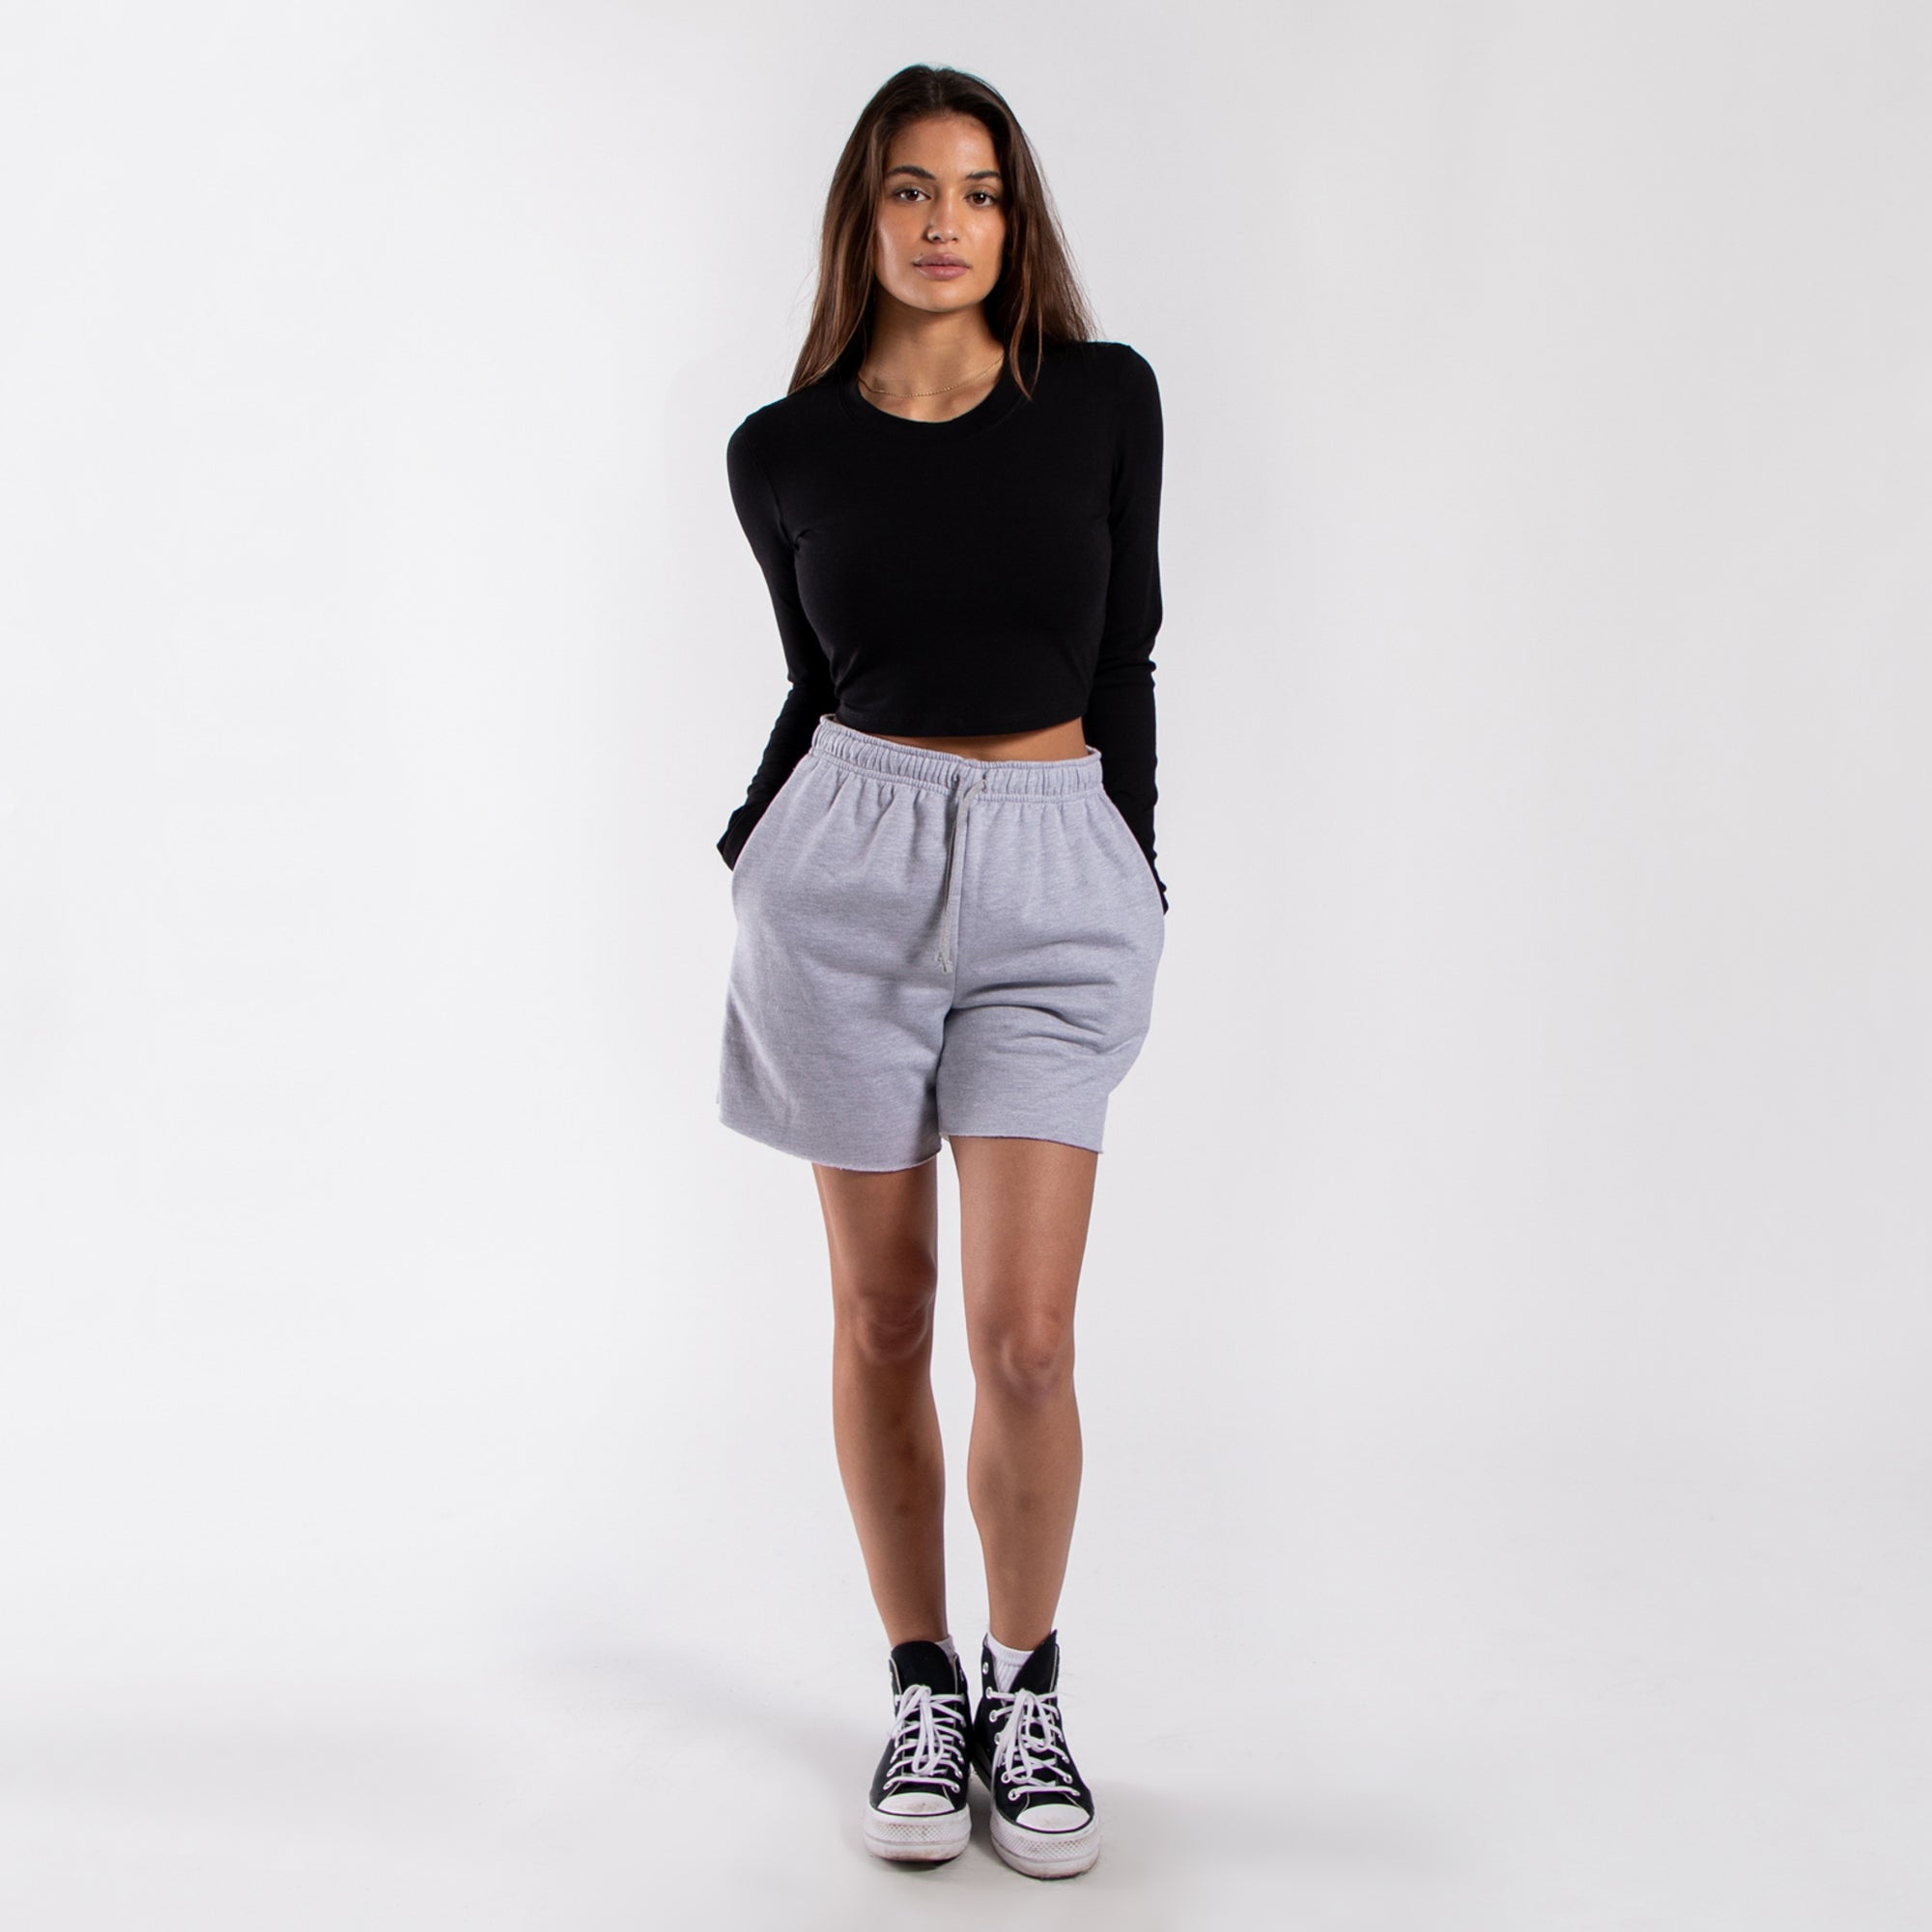 4002 - Women's Fitted Cropped Long Sleeve Tee